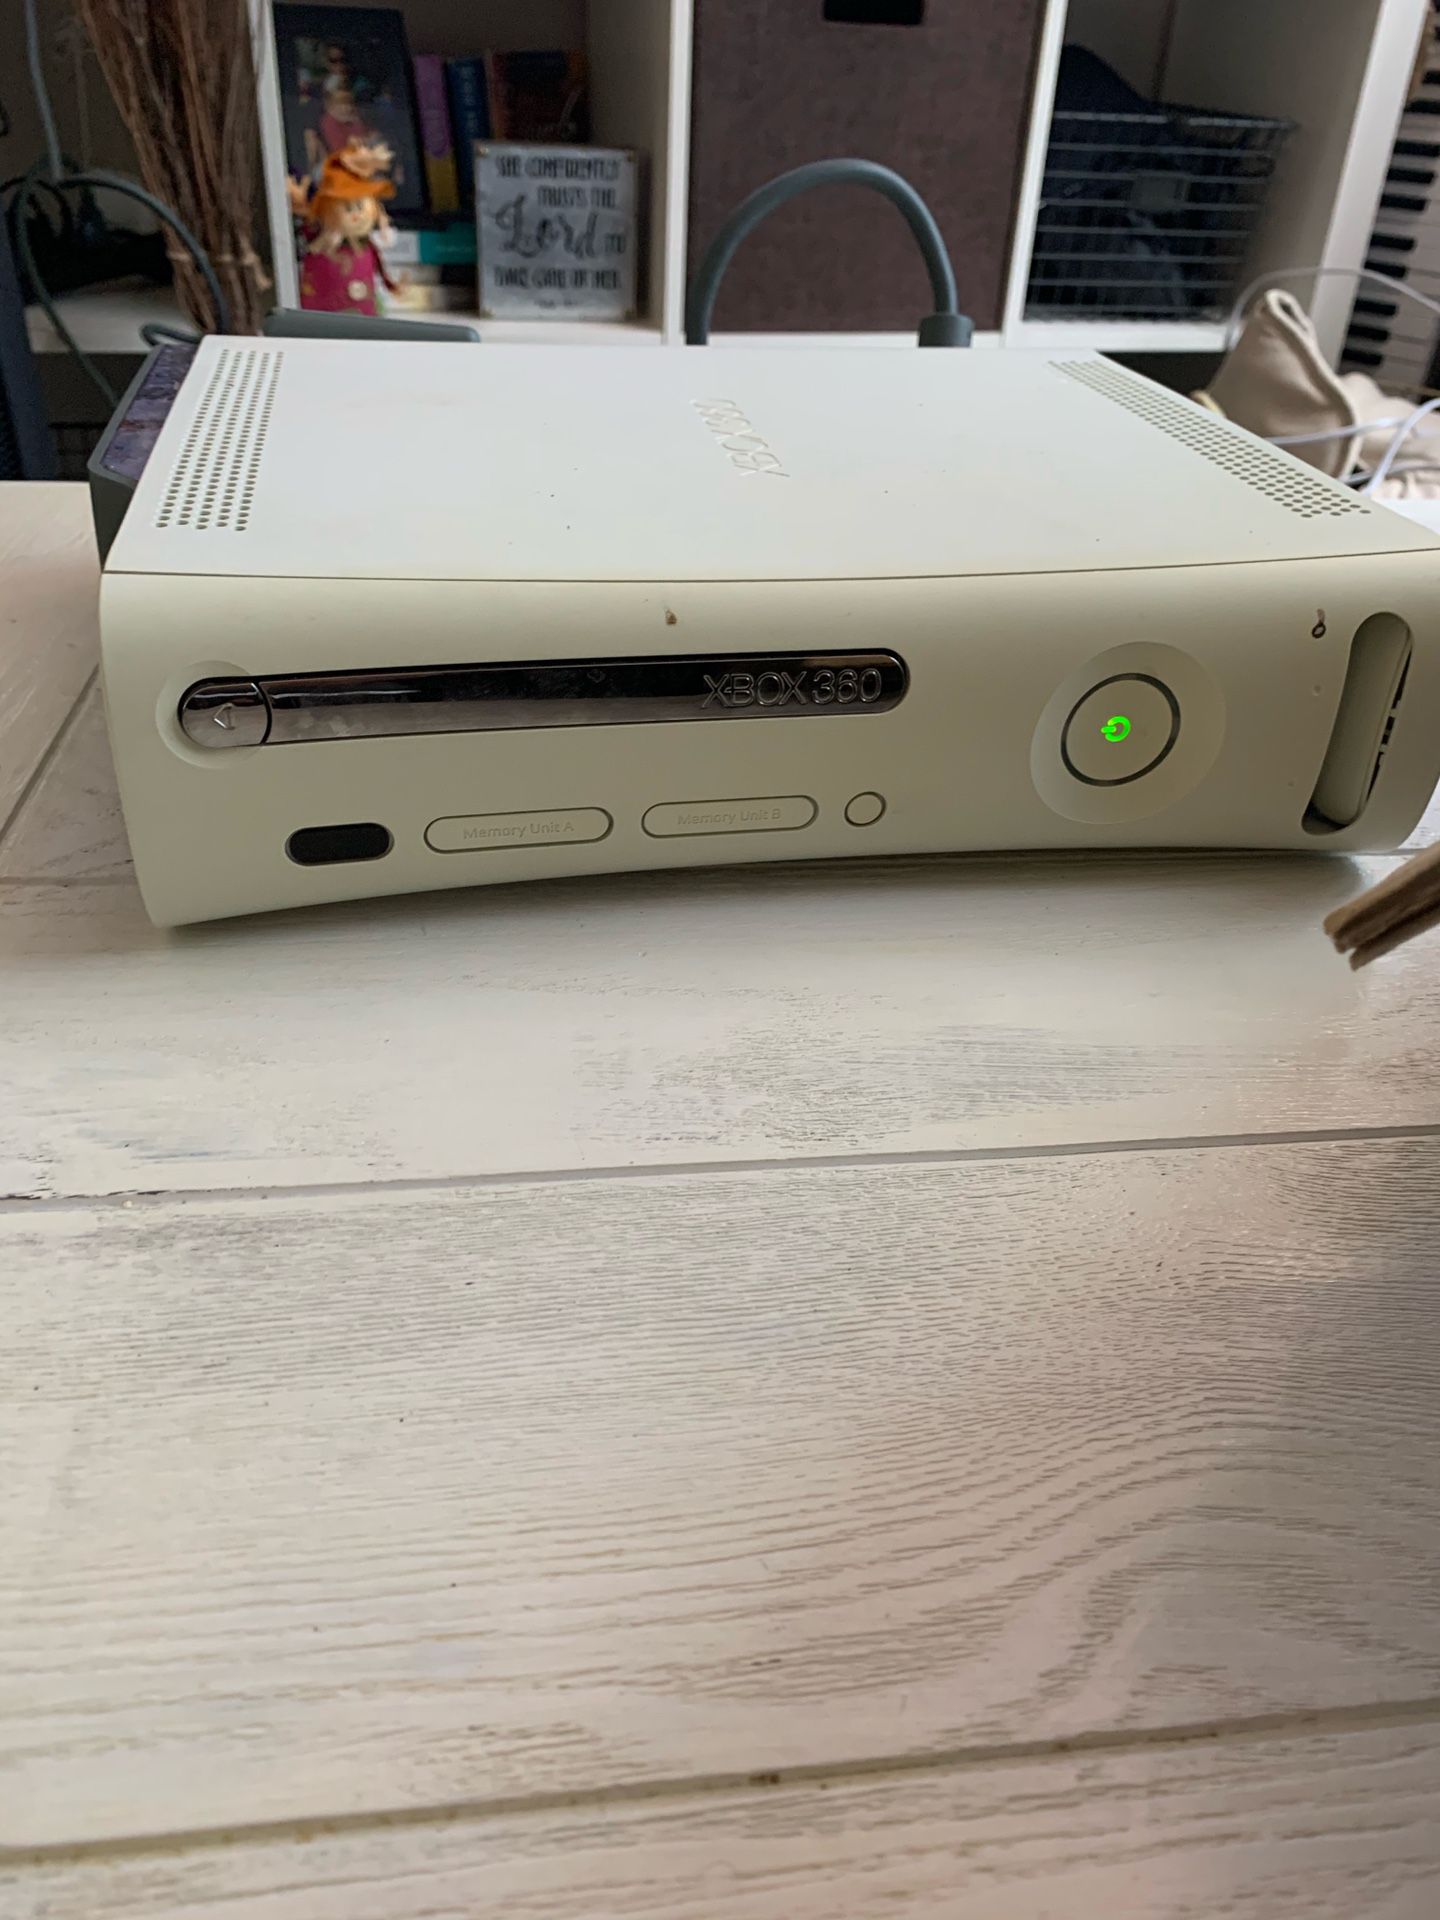 Xbox 360 in great condition with games and internet adapter